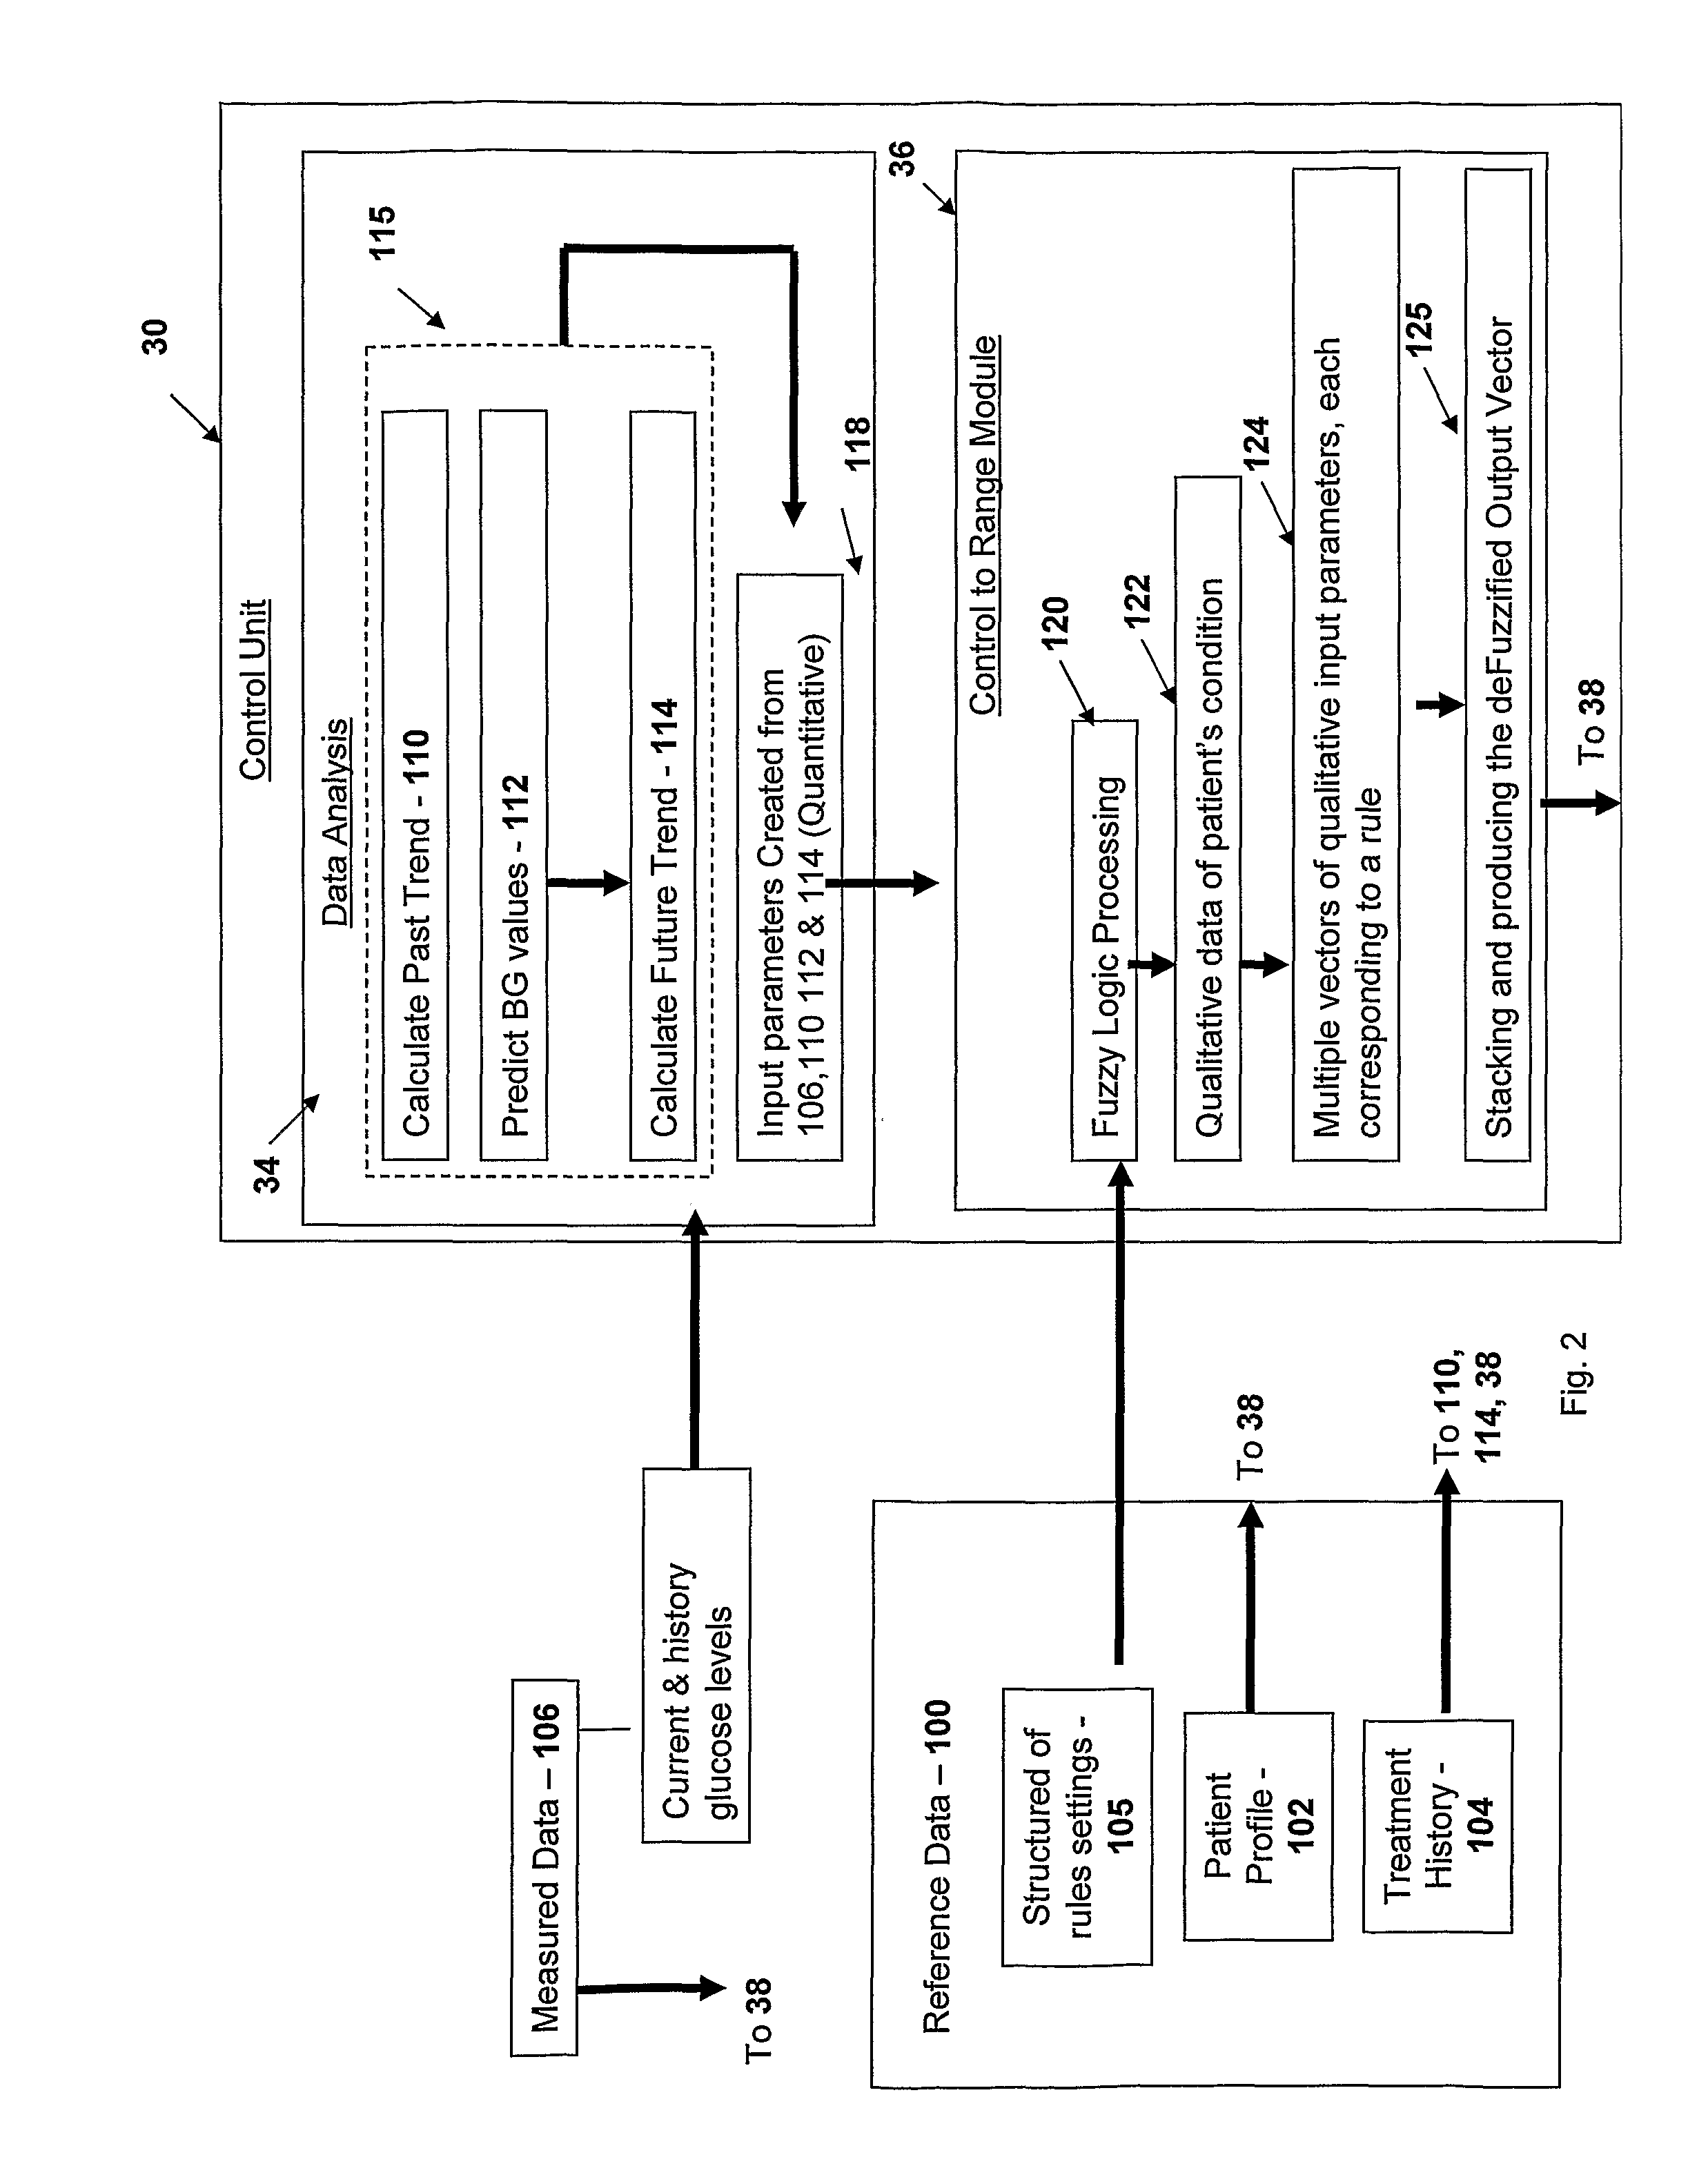 Method and system for automatic monitoring of diabetes related treatments